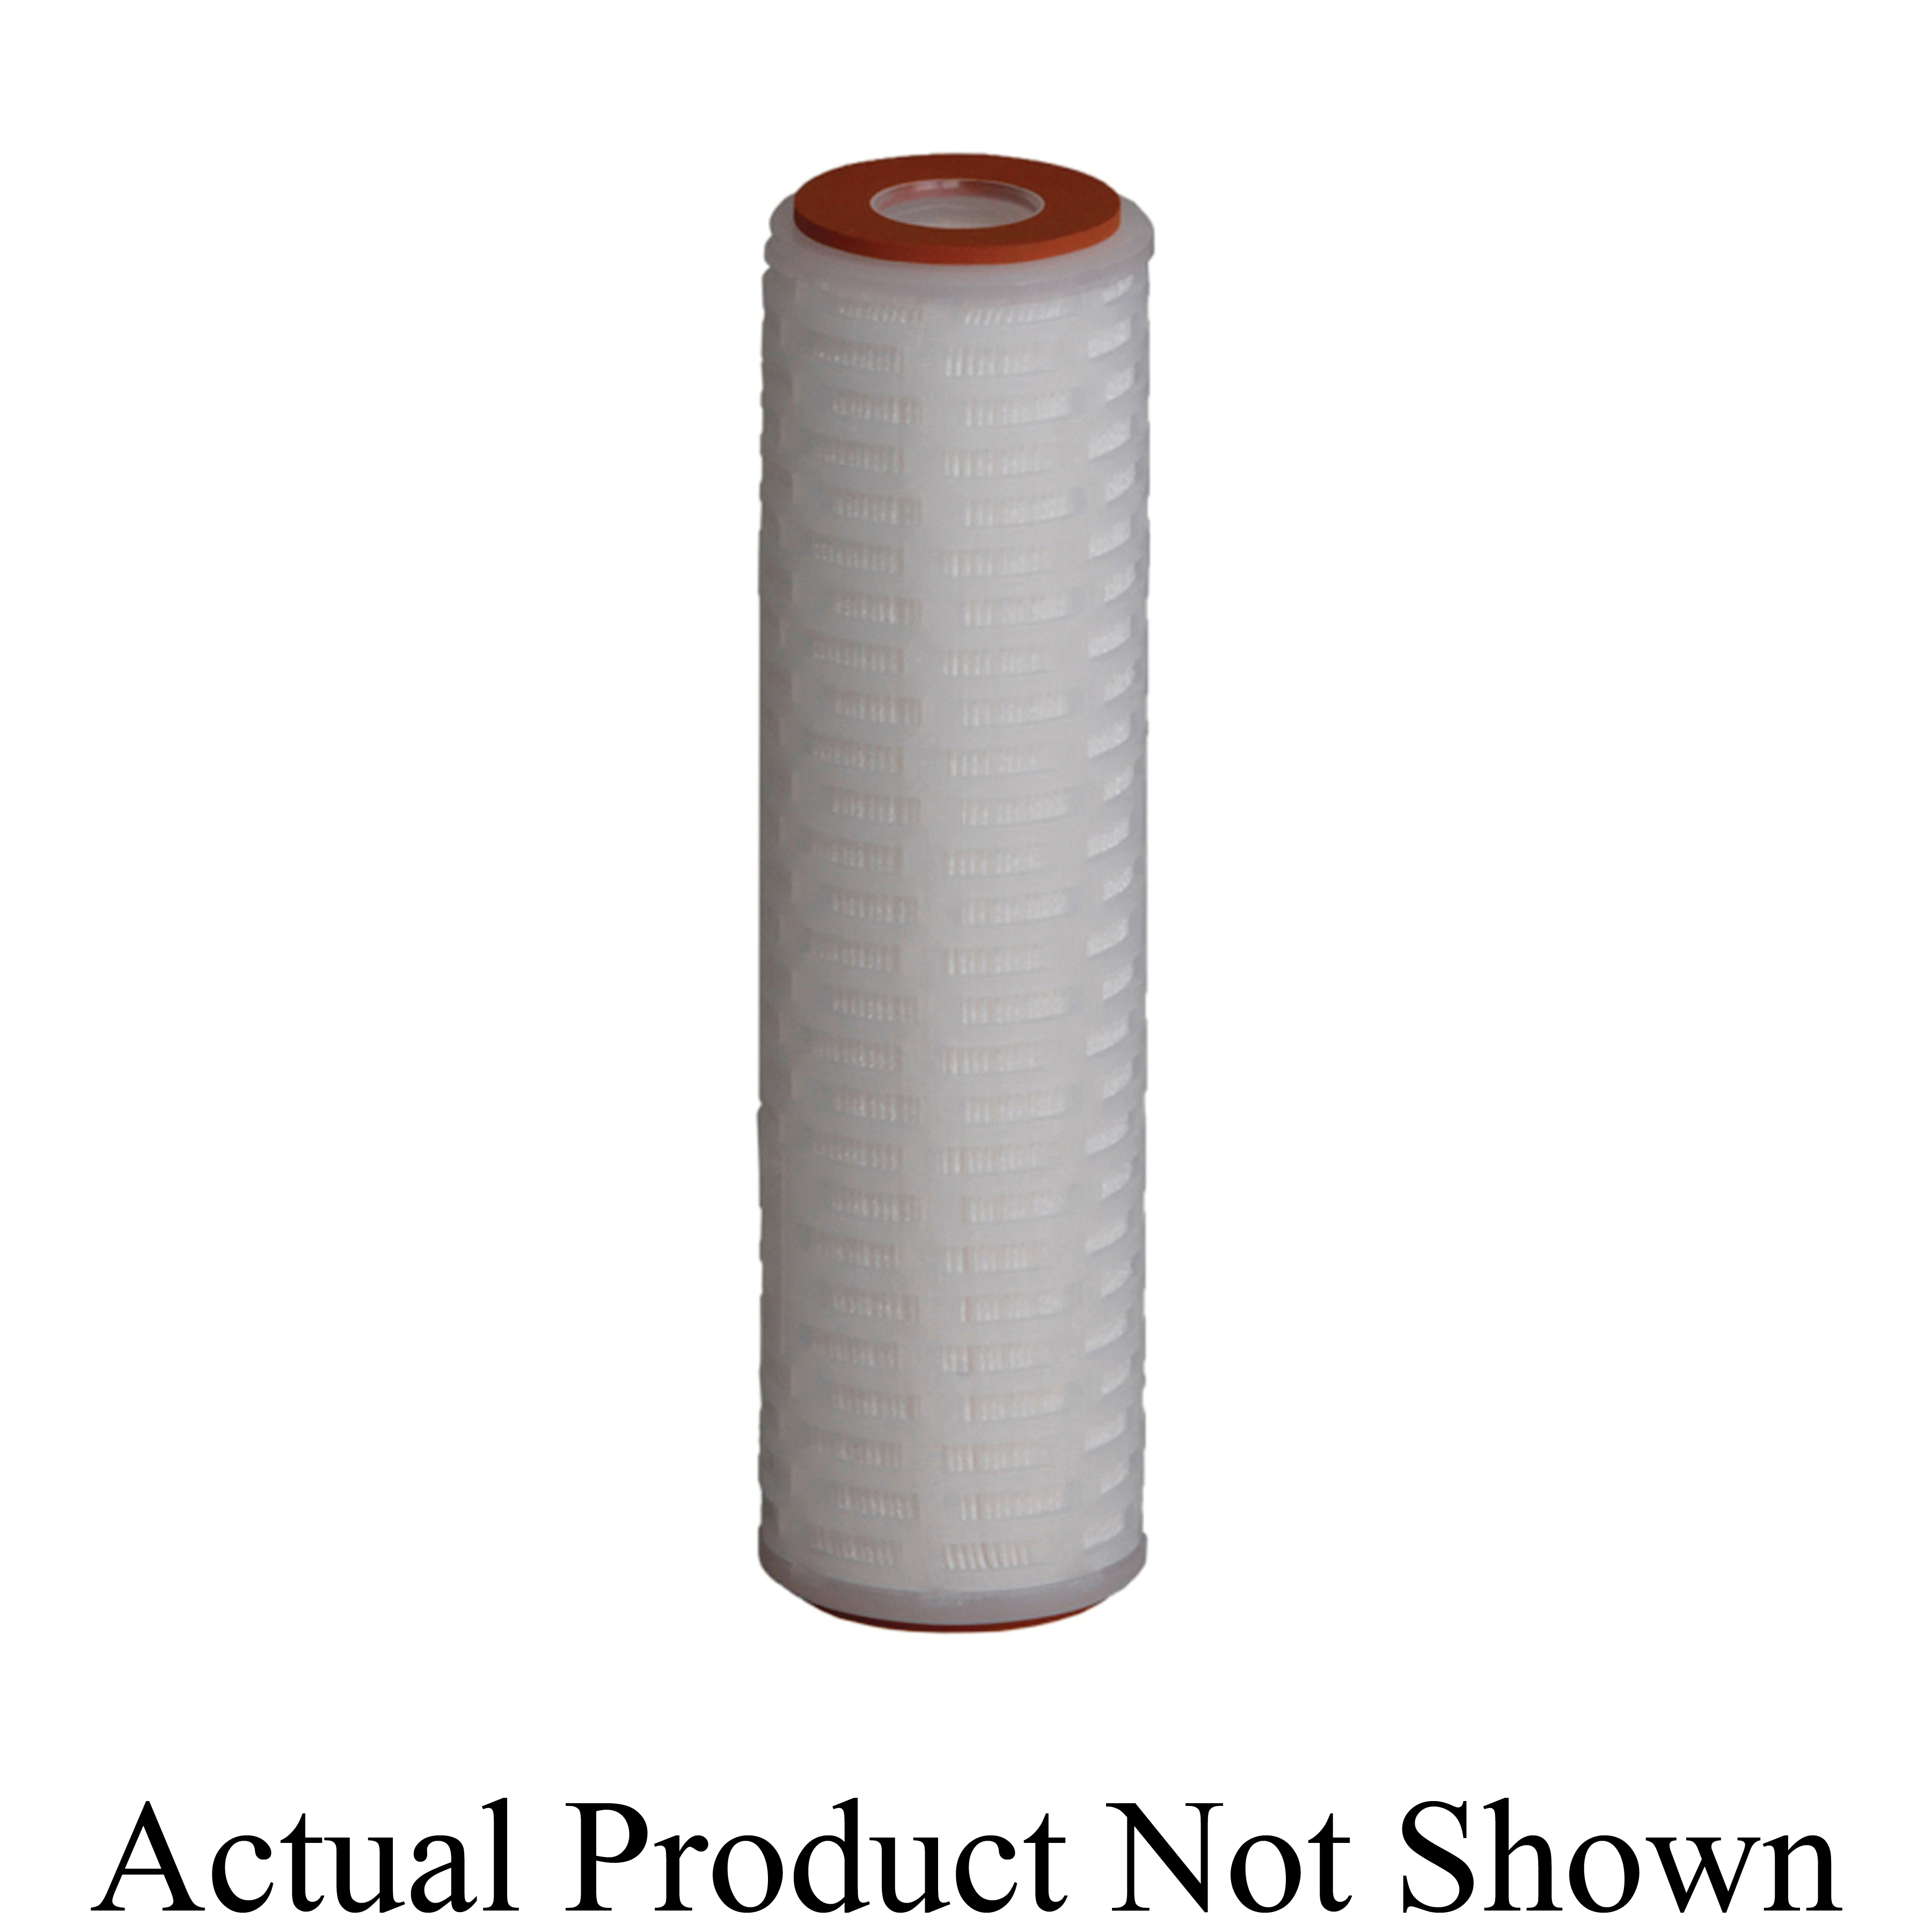 3M™ Aqua-Pure™ 7000051058 Drop-in Standard Diameter Whole House Replacement Filter Cartridge, 2-1/2 in Dia Outside x 9-3/4 in H, 5 gpm Flow Rate, 40 to 100 deg F, 125 psi Max Pressure